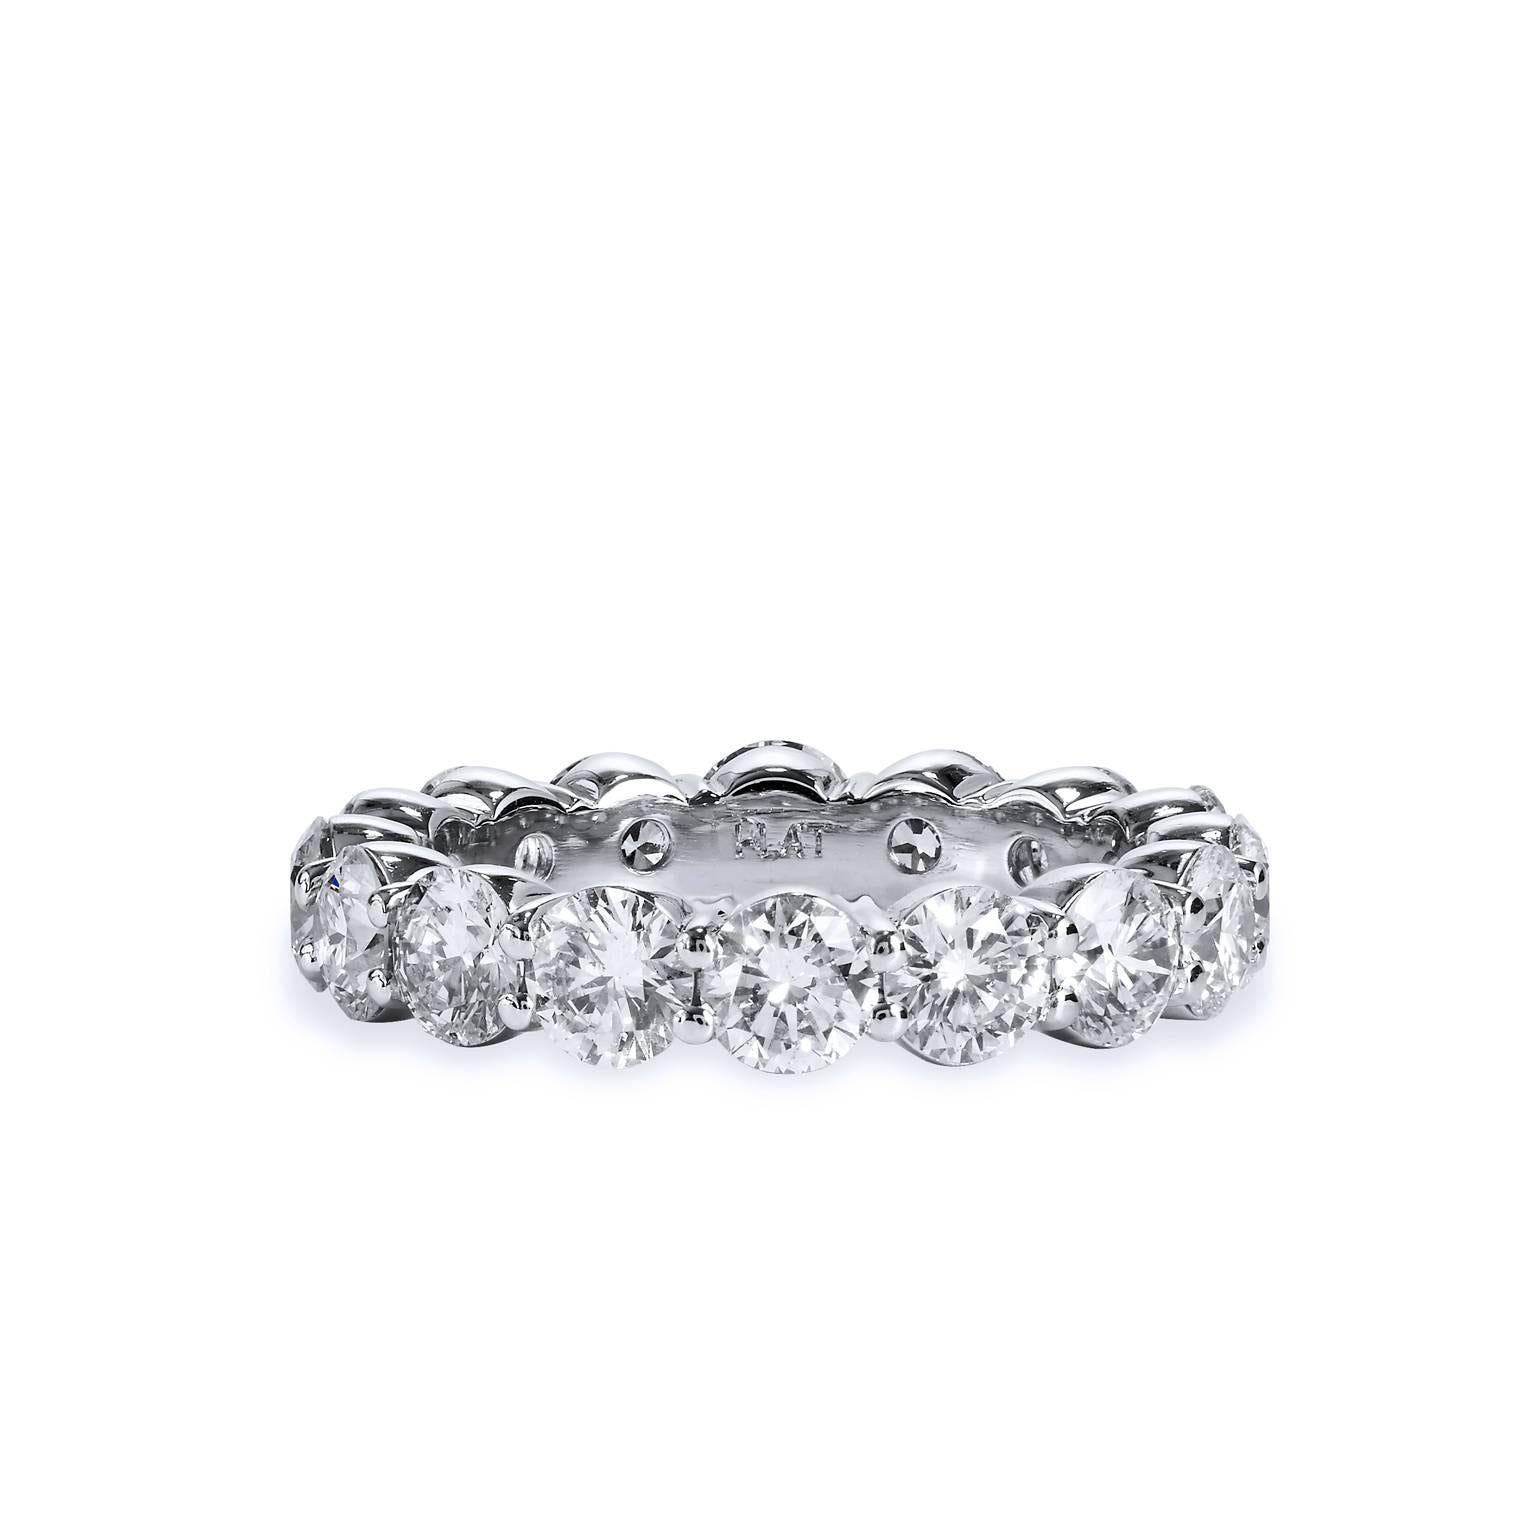 Crafted in platinum, this wedding band features 16 diamonds that wrap the finger and weighs approximately 3.98 total carats. The diamonds are graded I/J SI1 and are set with a shared prong design. The ring is a timeless anniversary band design that